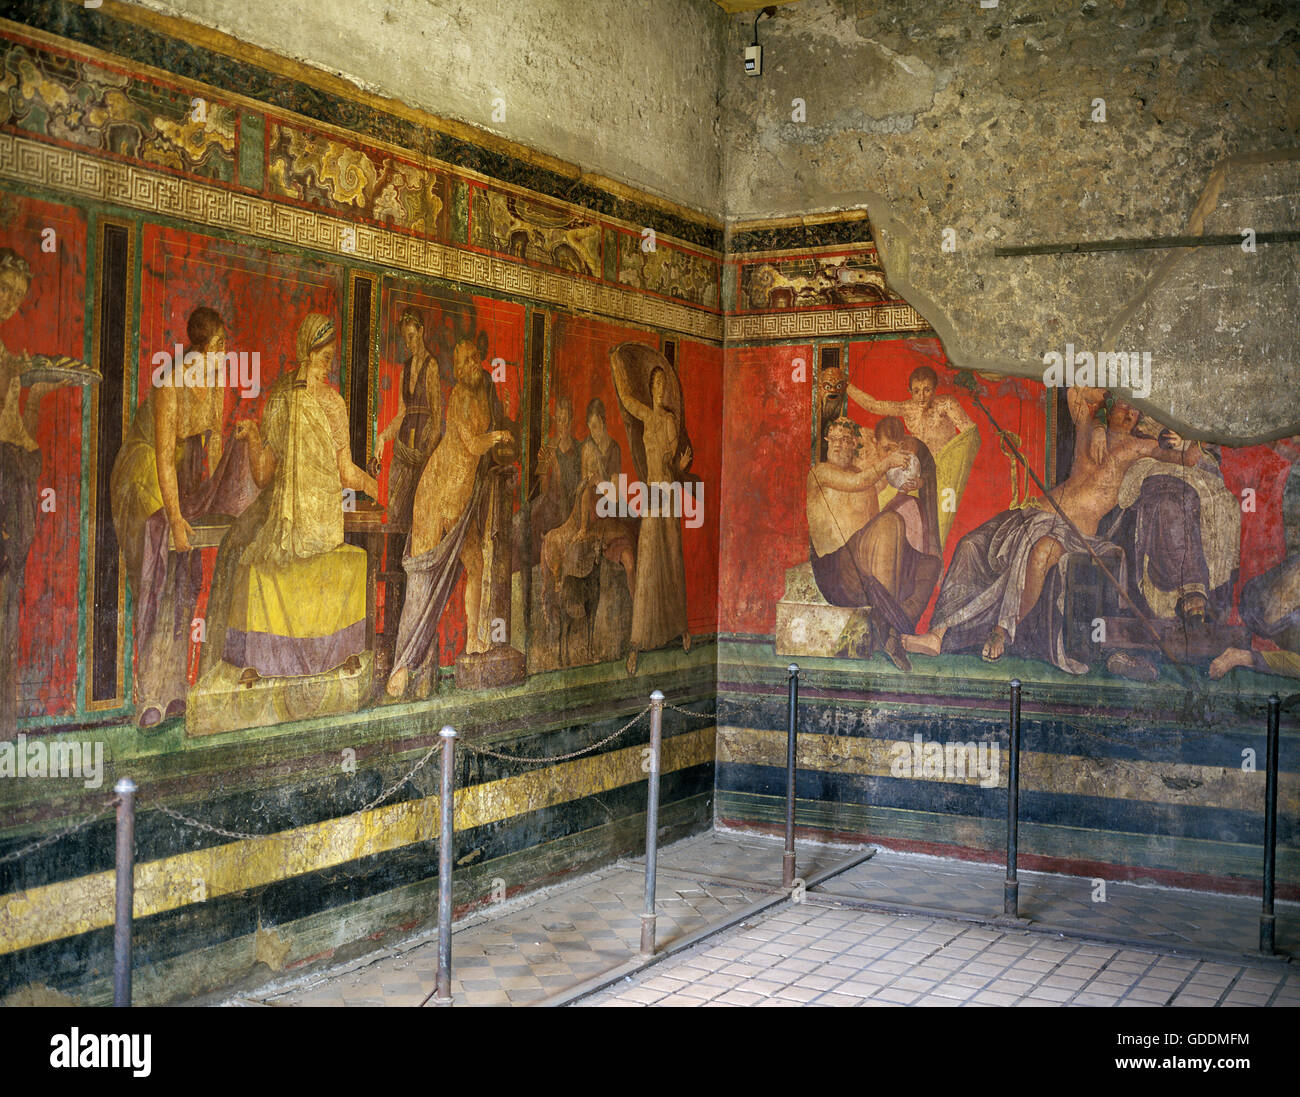 Mural Paint of Pompeii in Italy, City destroyed and completely buried during an Eruption of the Volcano Mount Vesuvius in August 79, a Unesco World Heritage Site since 1997 Stock Photo